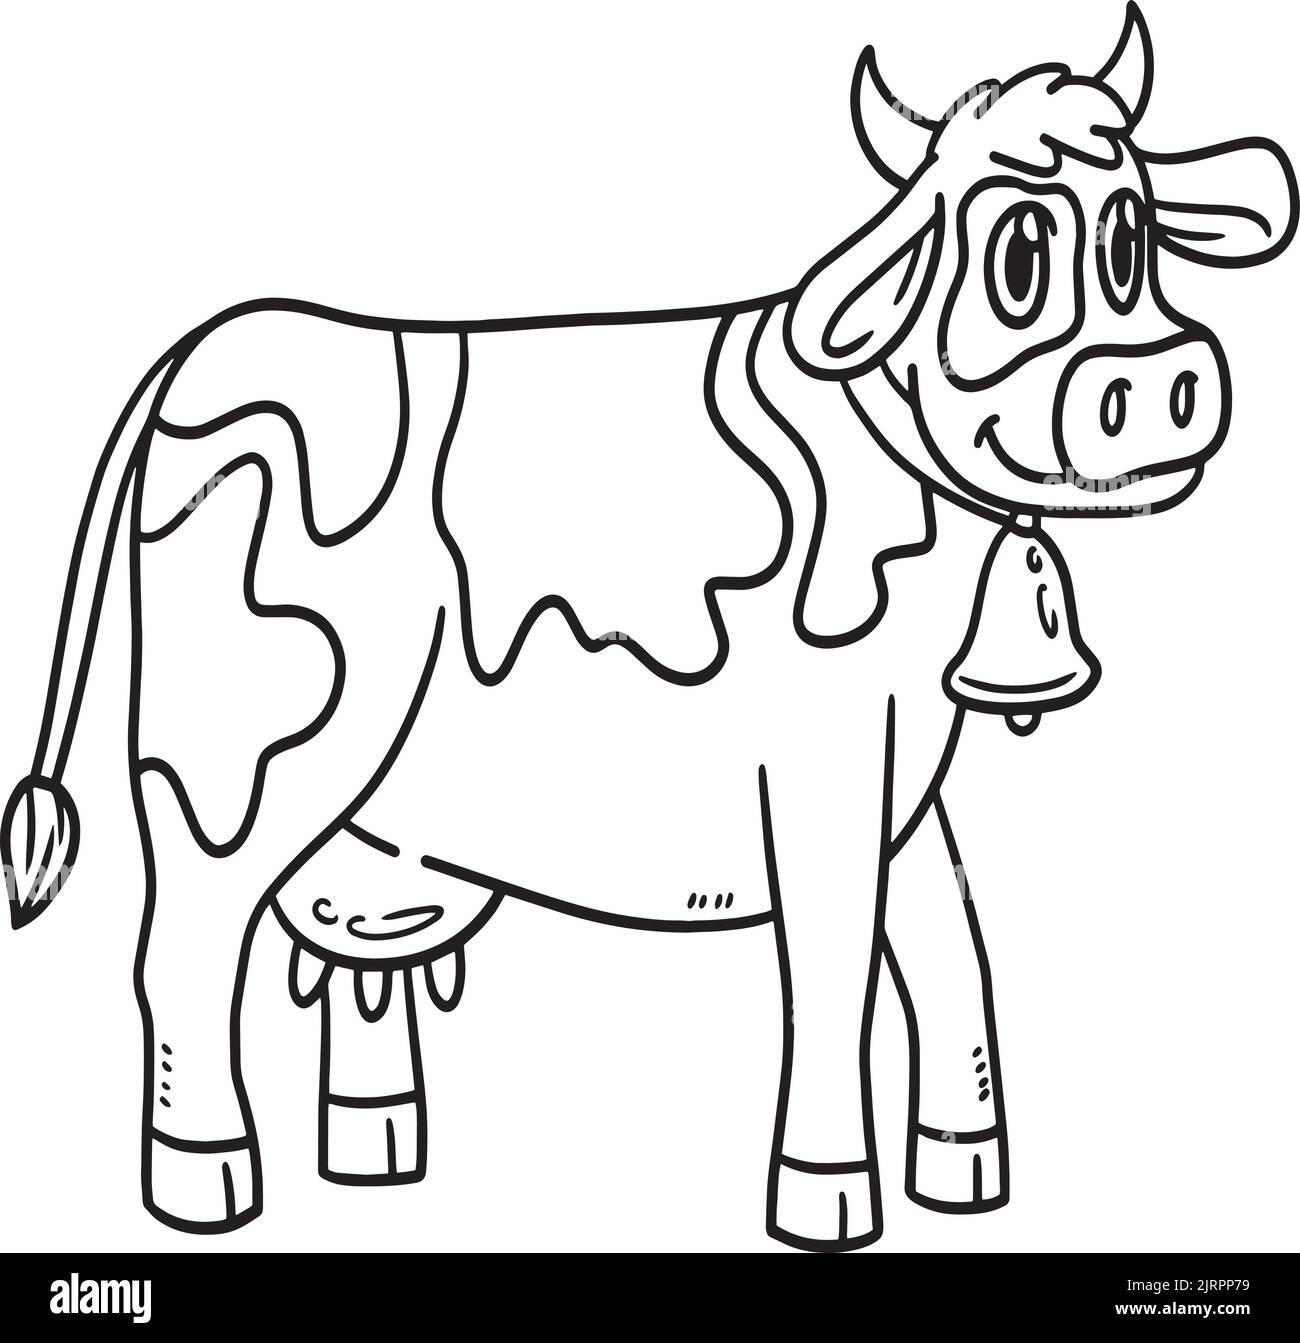 Cow Animal Isolated Coloring Page für Kinder Stock Vektor